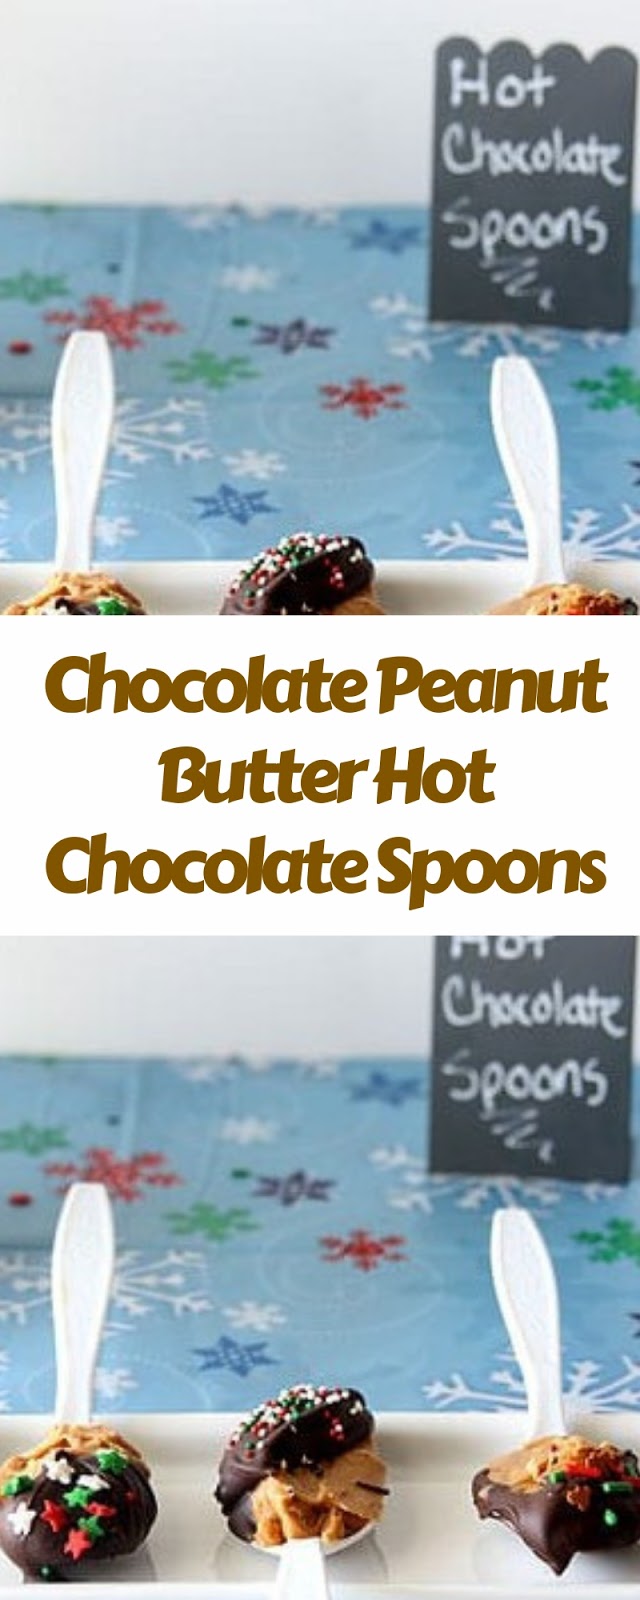 Chocolate Peanut Butter Hot Chocolate Spoons